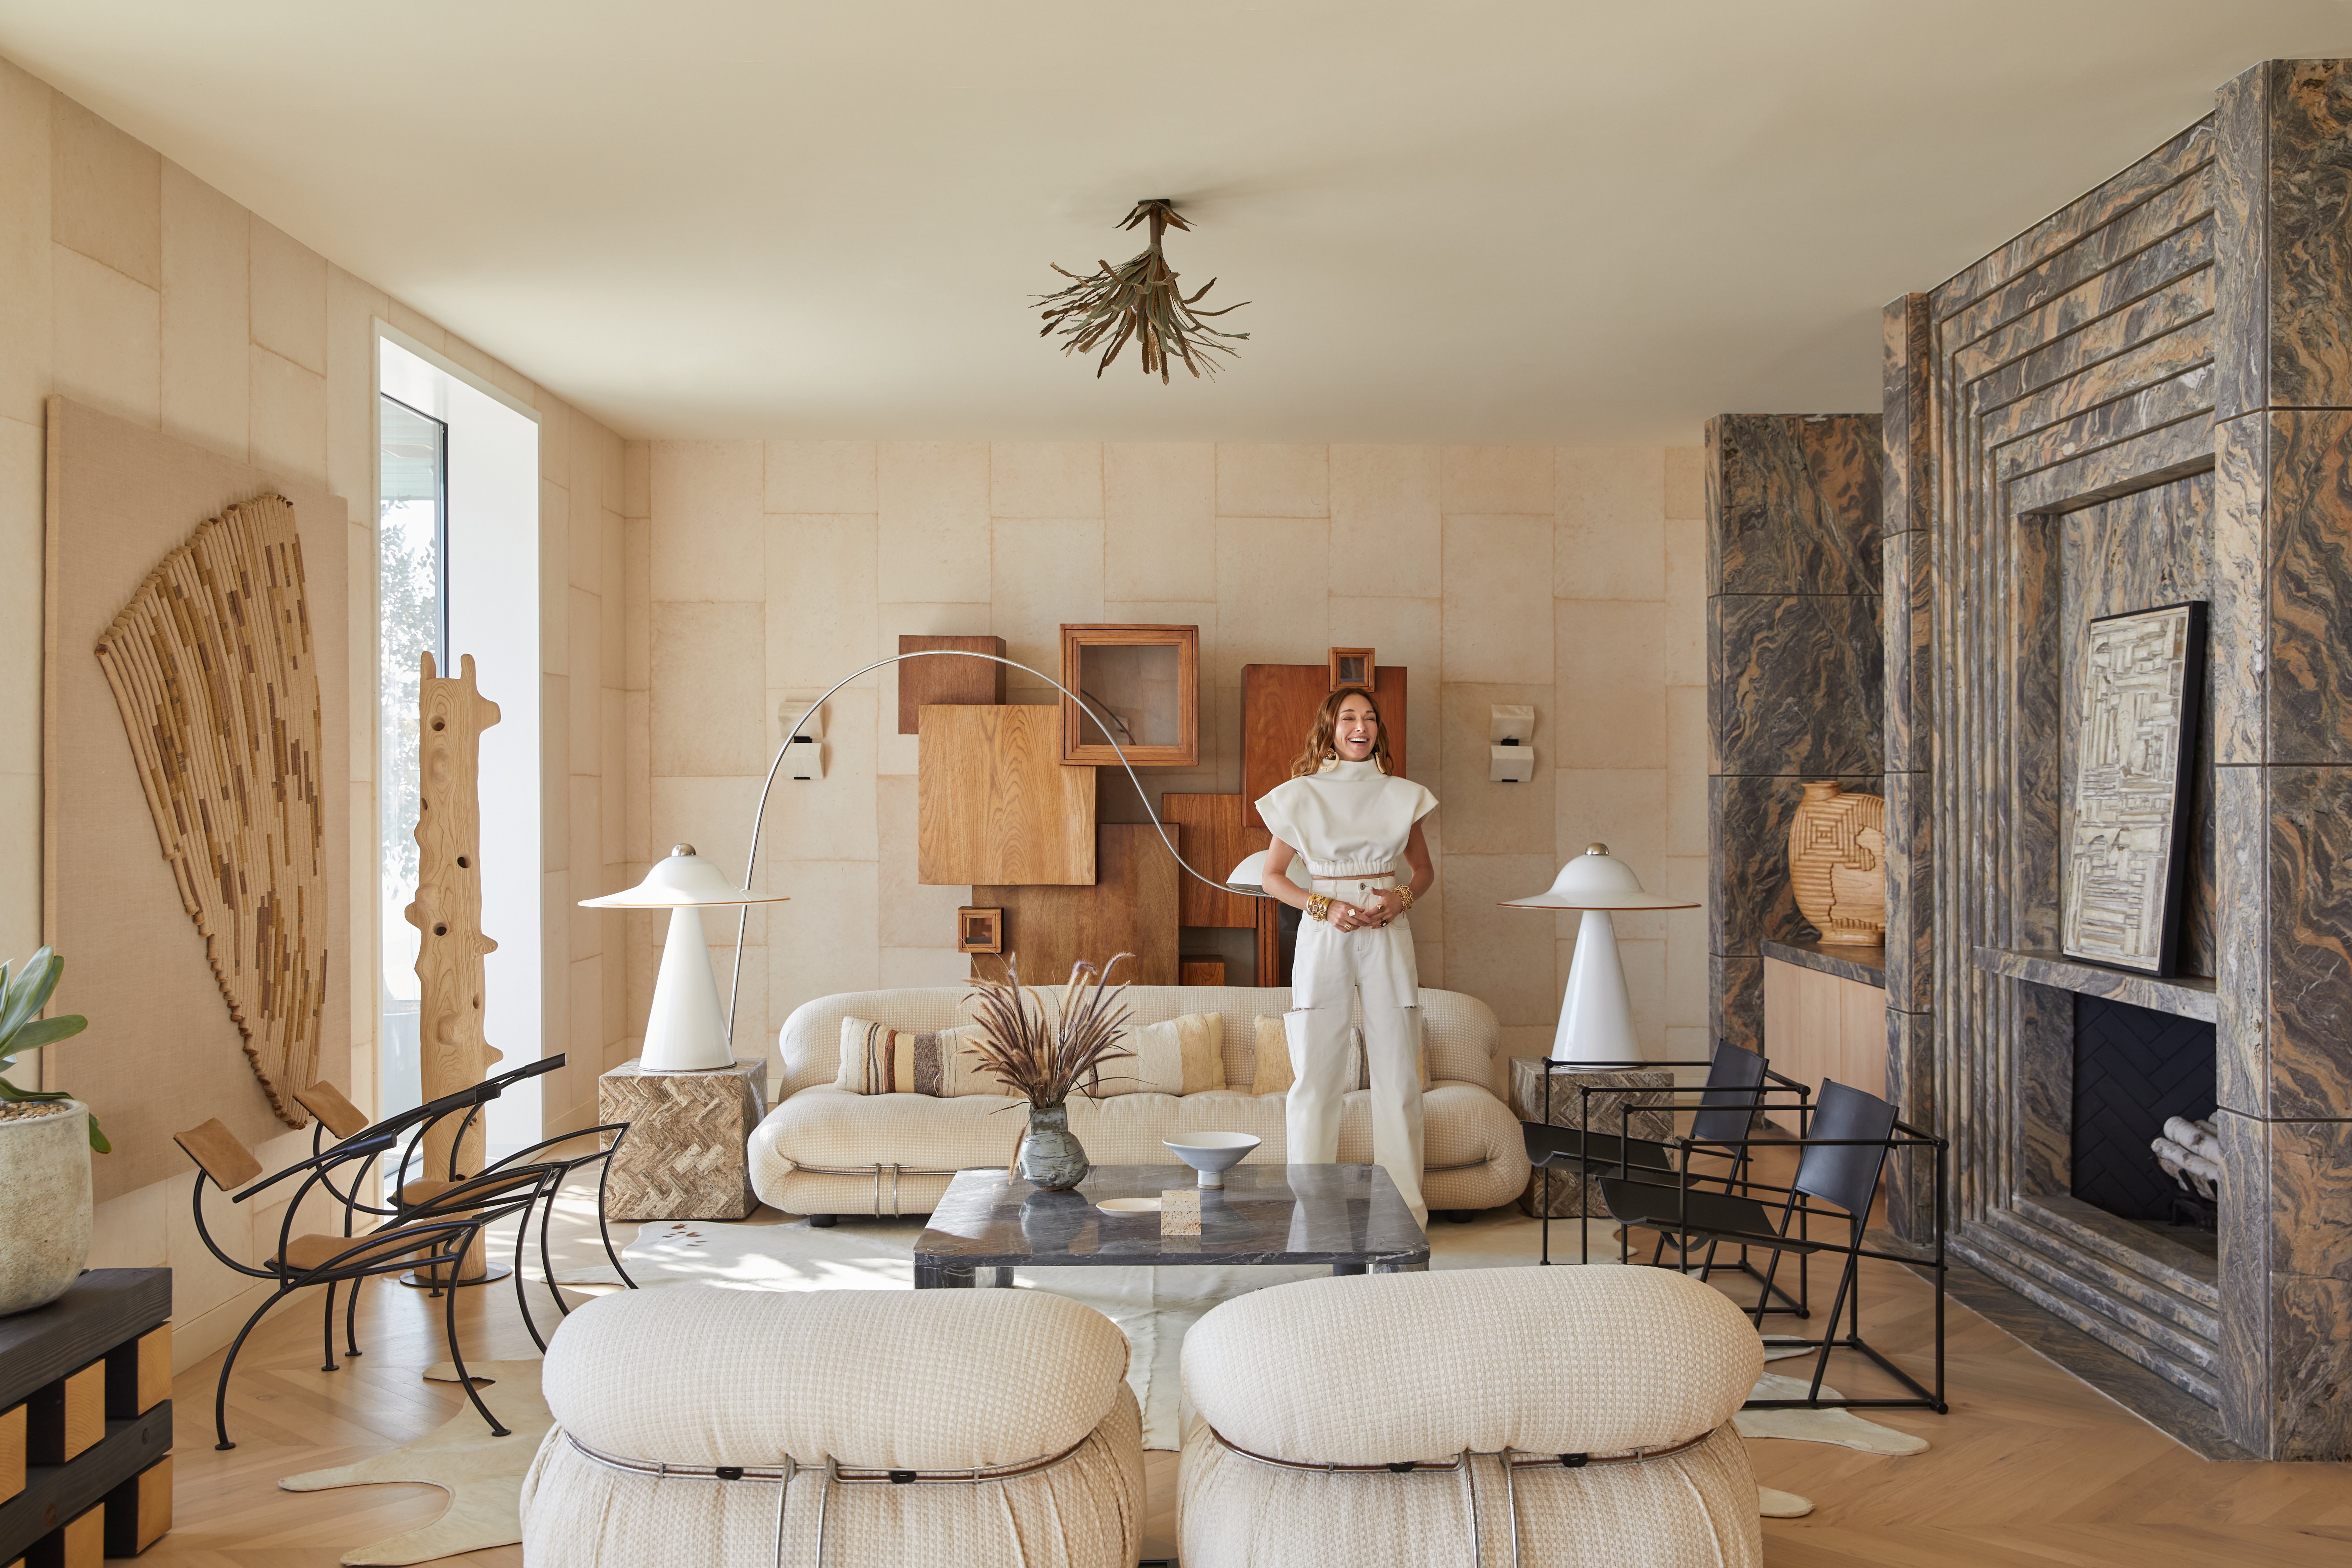 Leading Interior Designer Kelly Wearstler on How She Blends Artwork and Layout to Make Spaces You Want to Be In